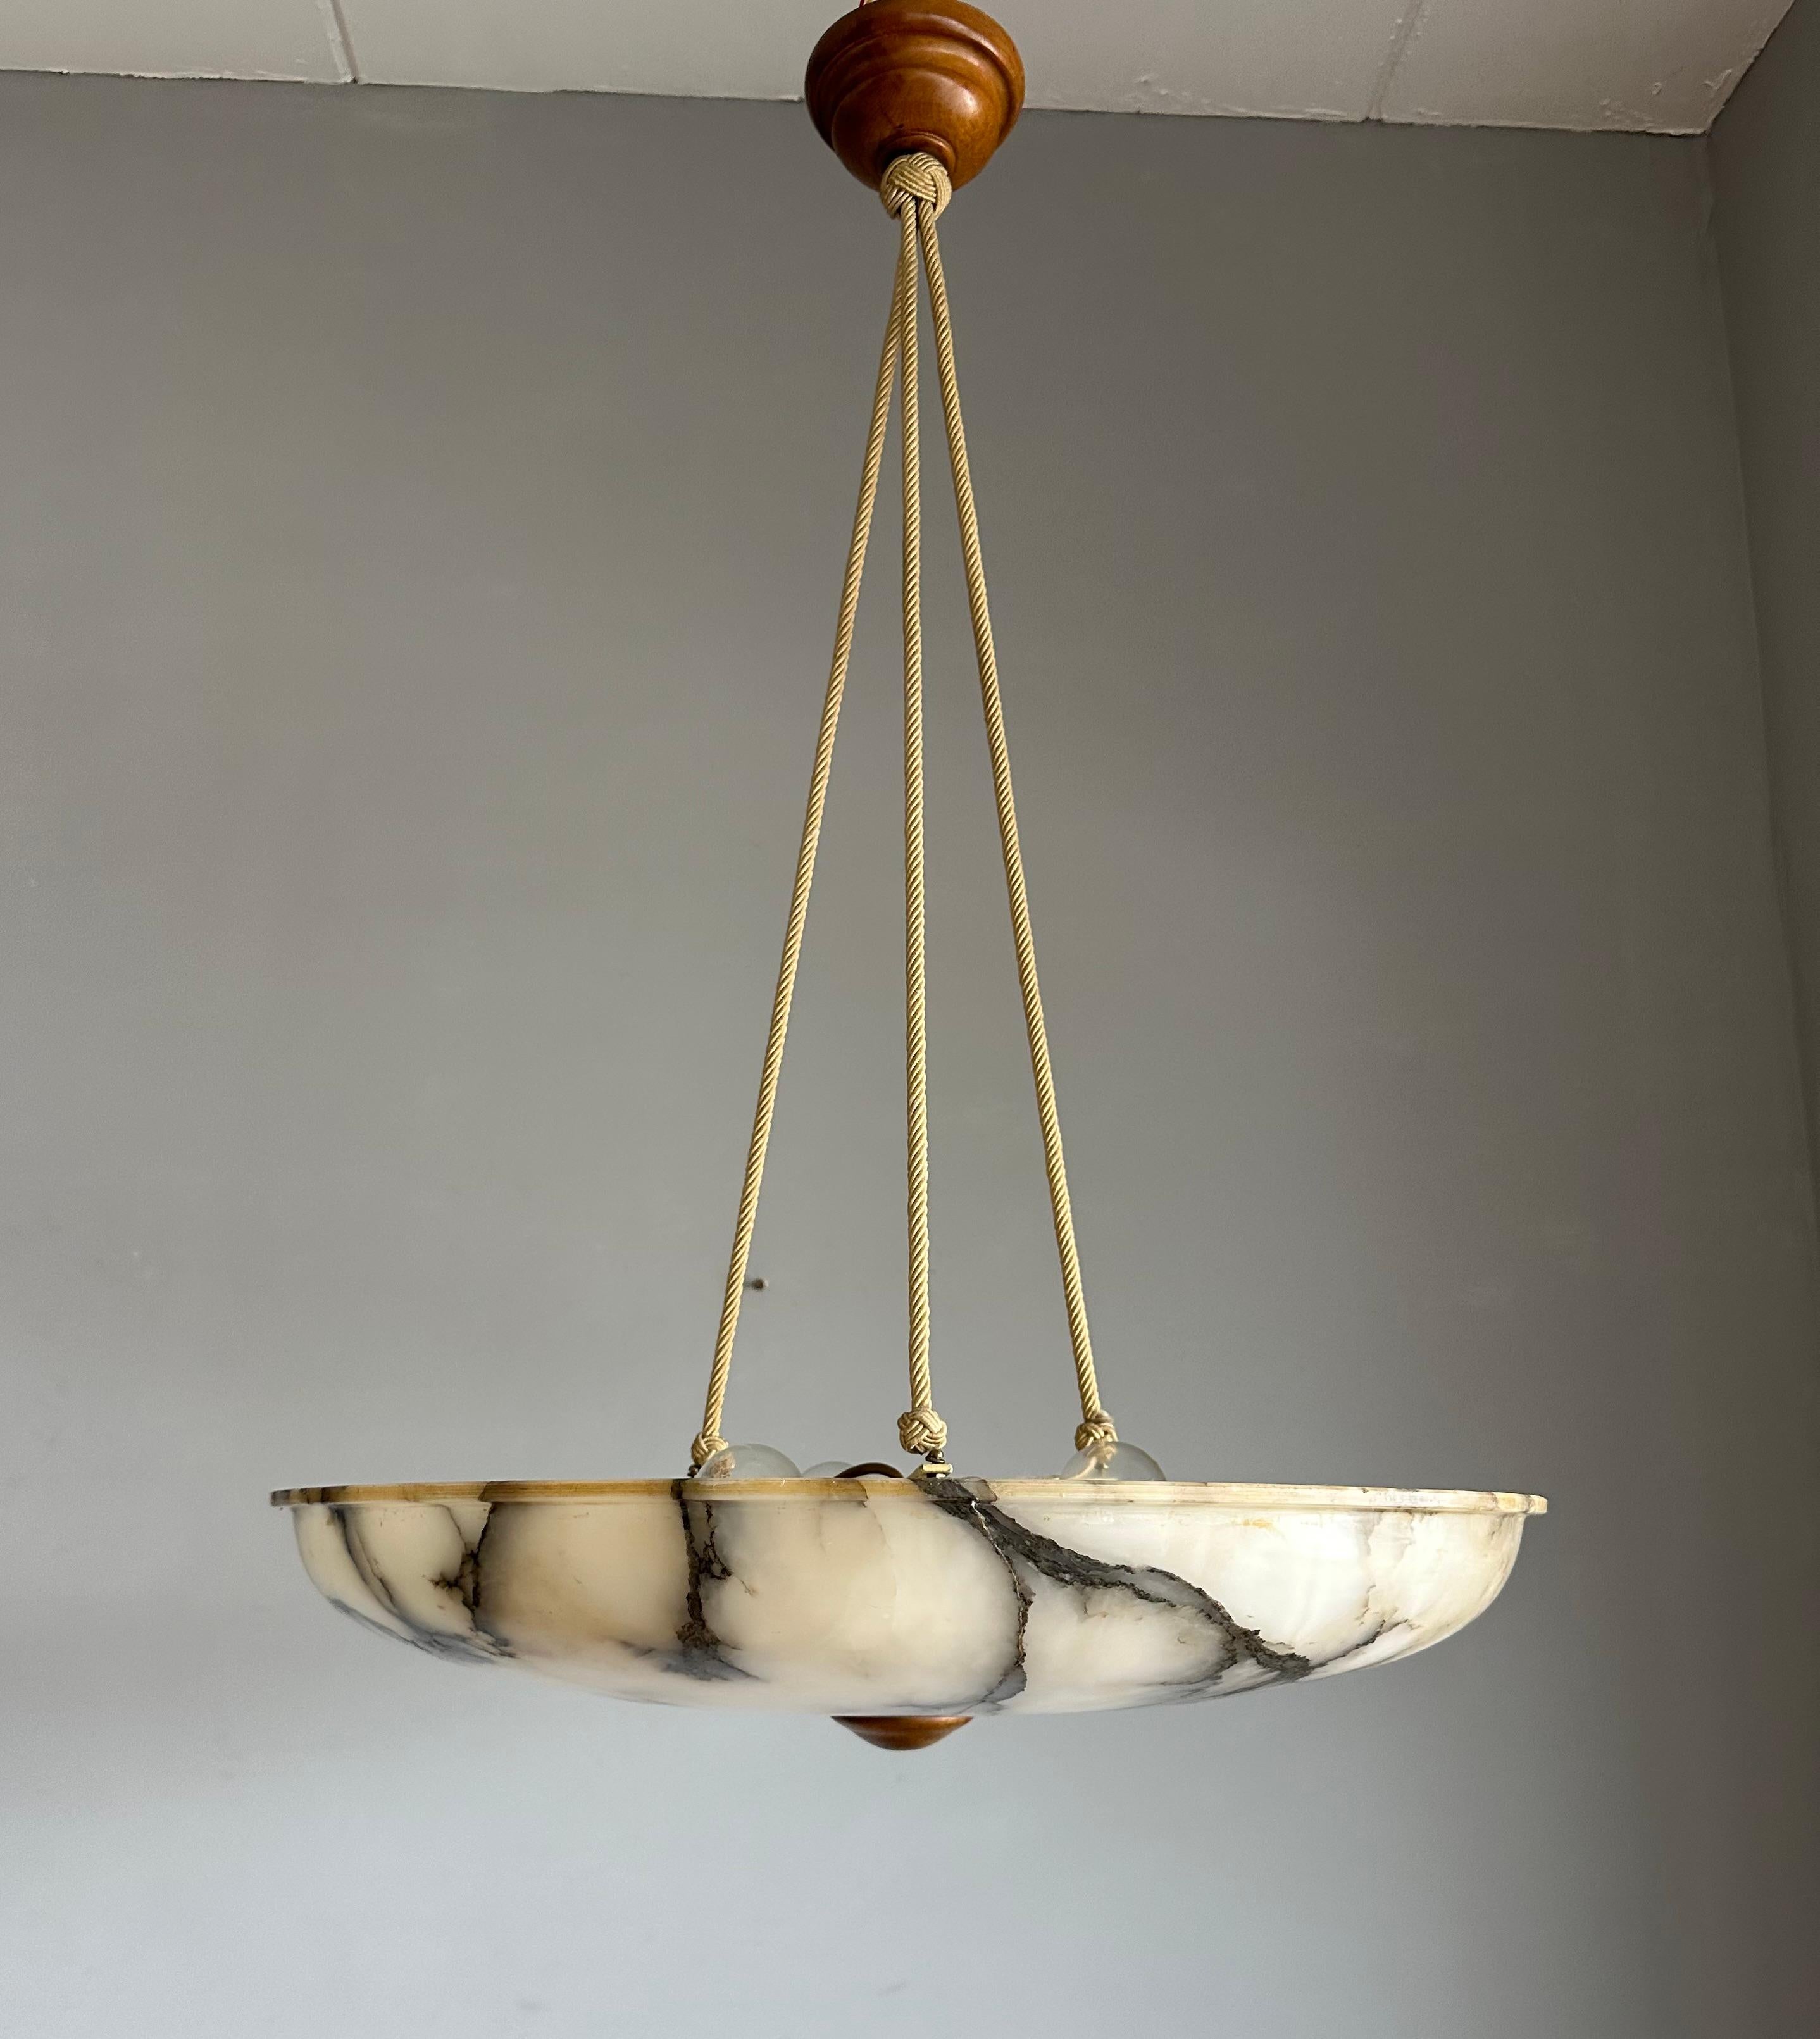 Rare and majestic, three light alabaster pendant from the heydays of the Art Deco era.

This rare and very large size Art Deco pendant light comes with a stunning design and polished alabaster shade. This large size and almost flat alabaster shade